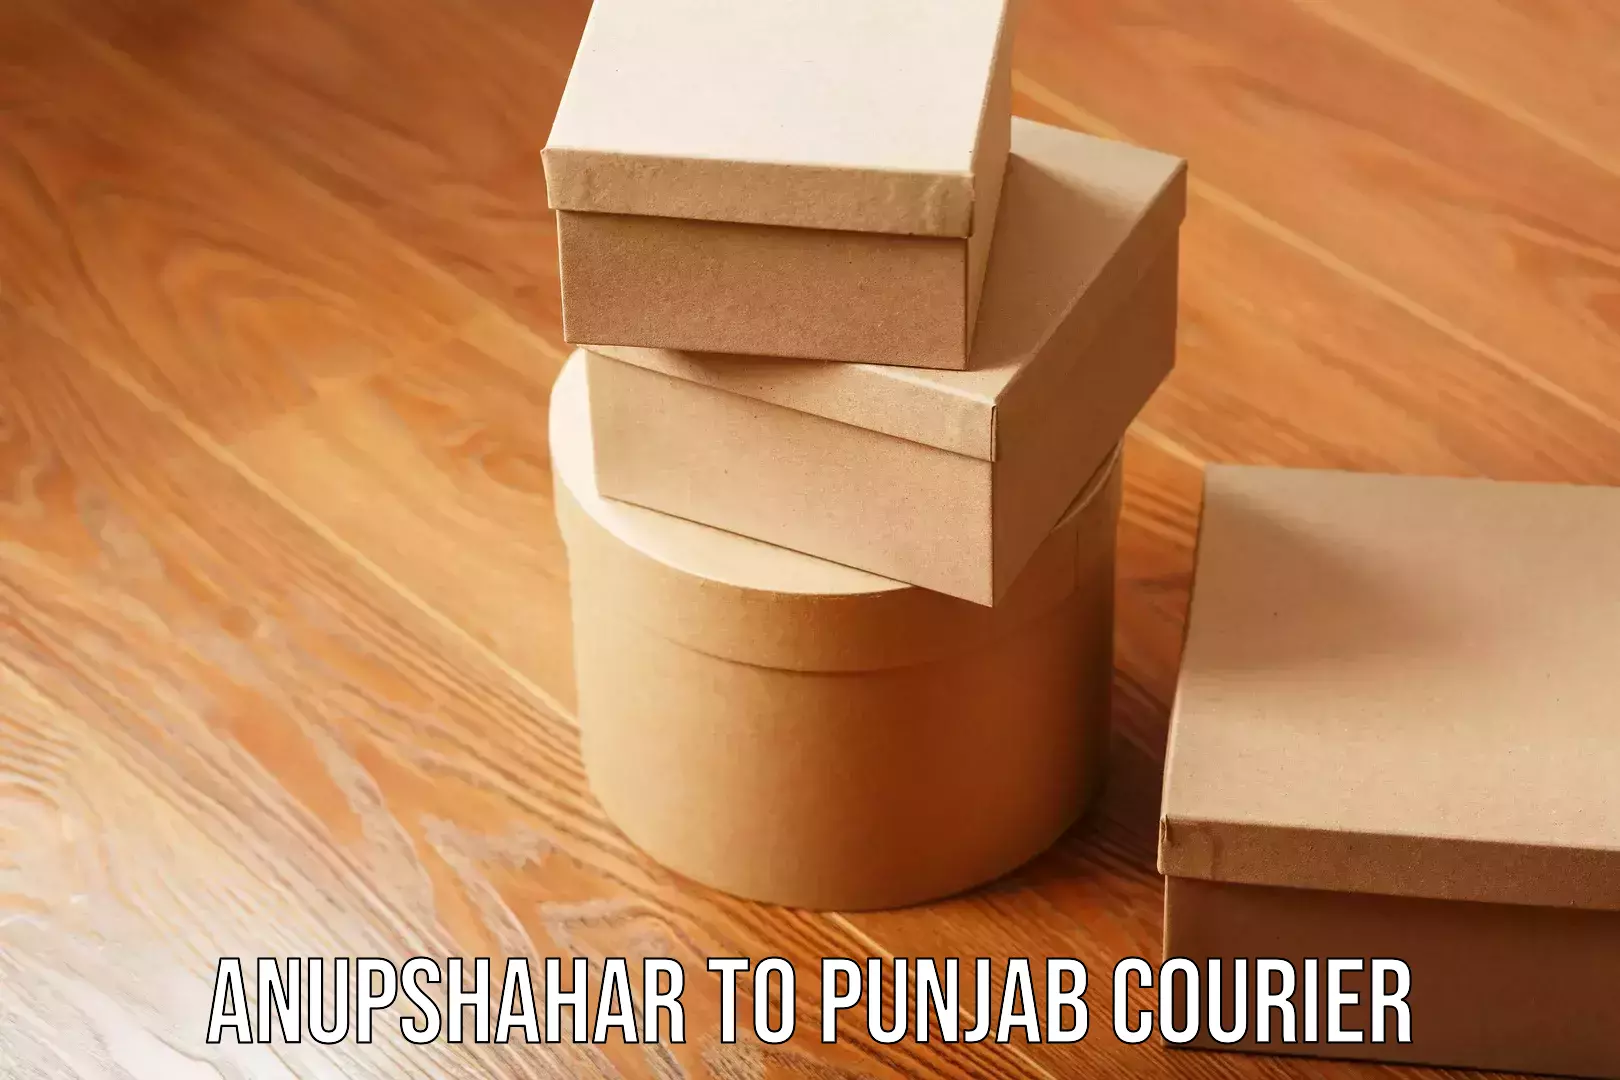 Cash on delivery service Anupshahar to Punjab